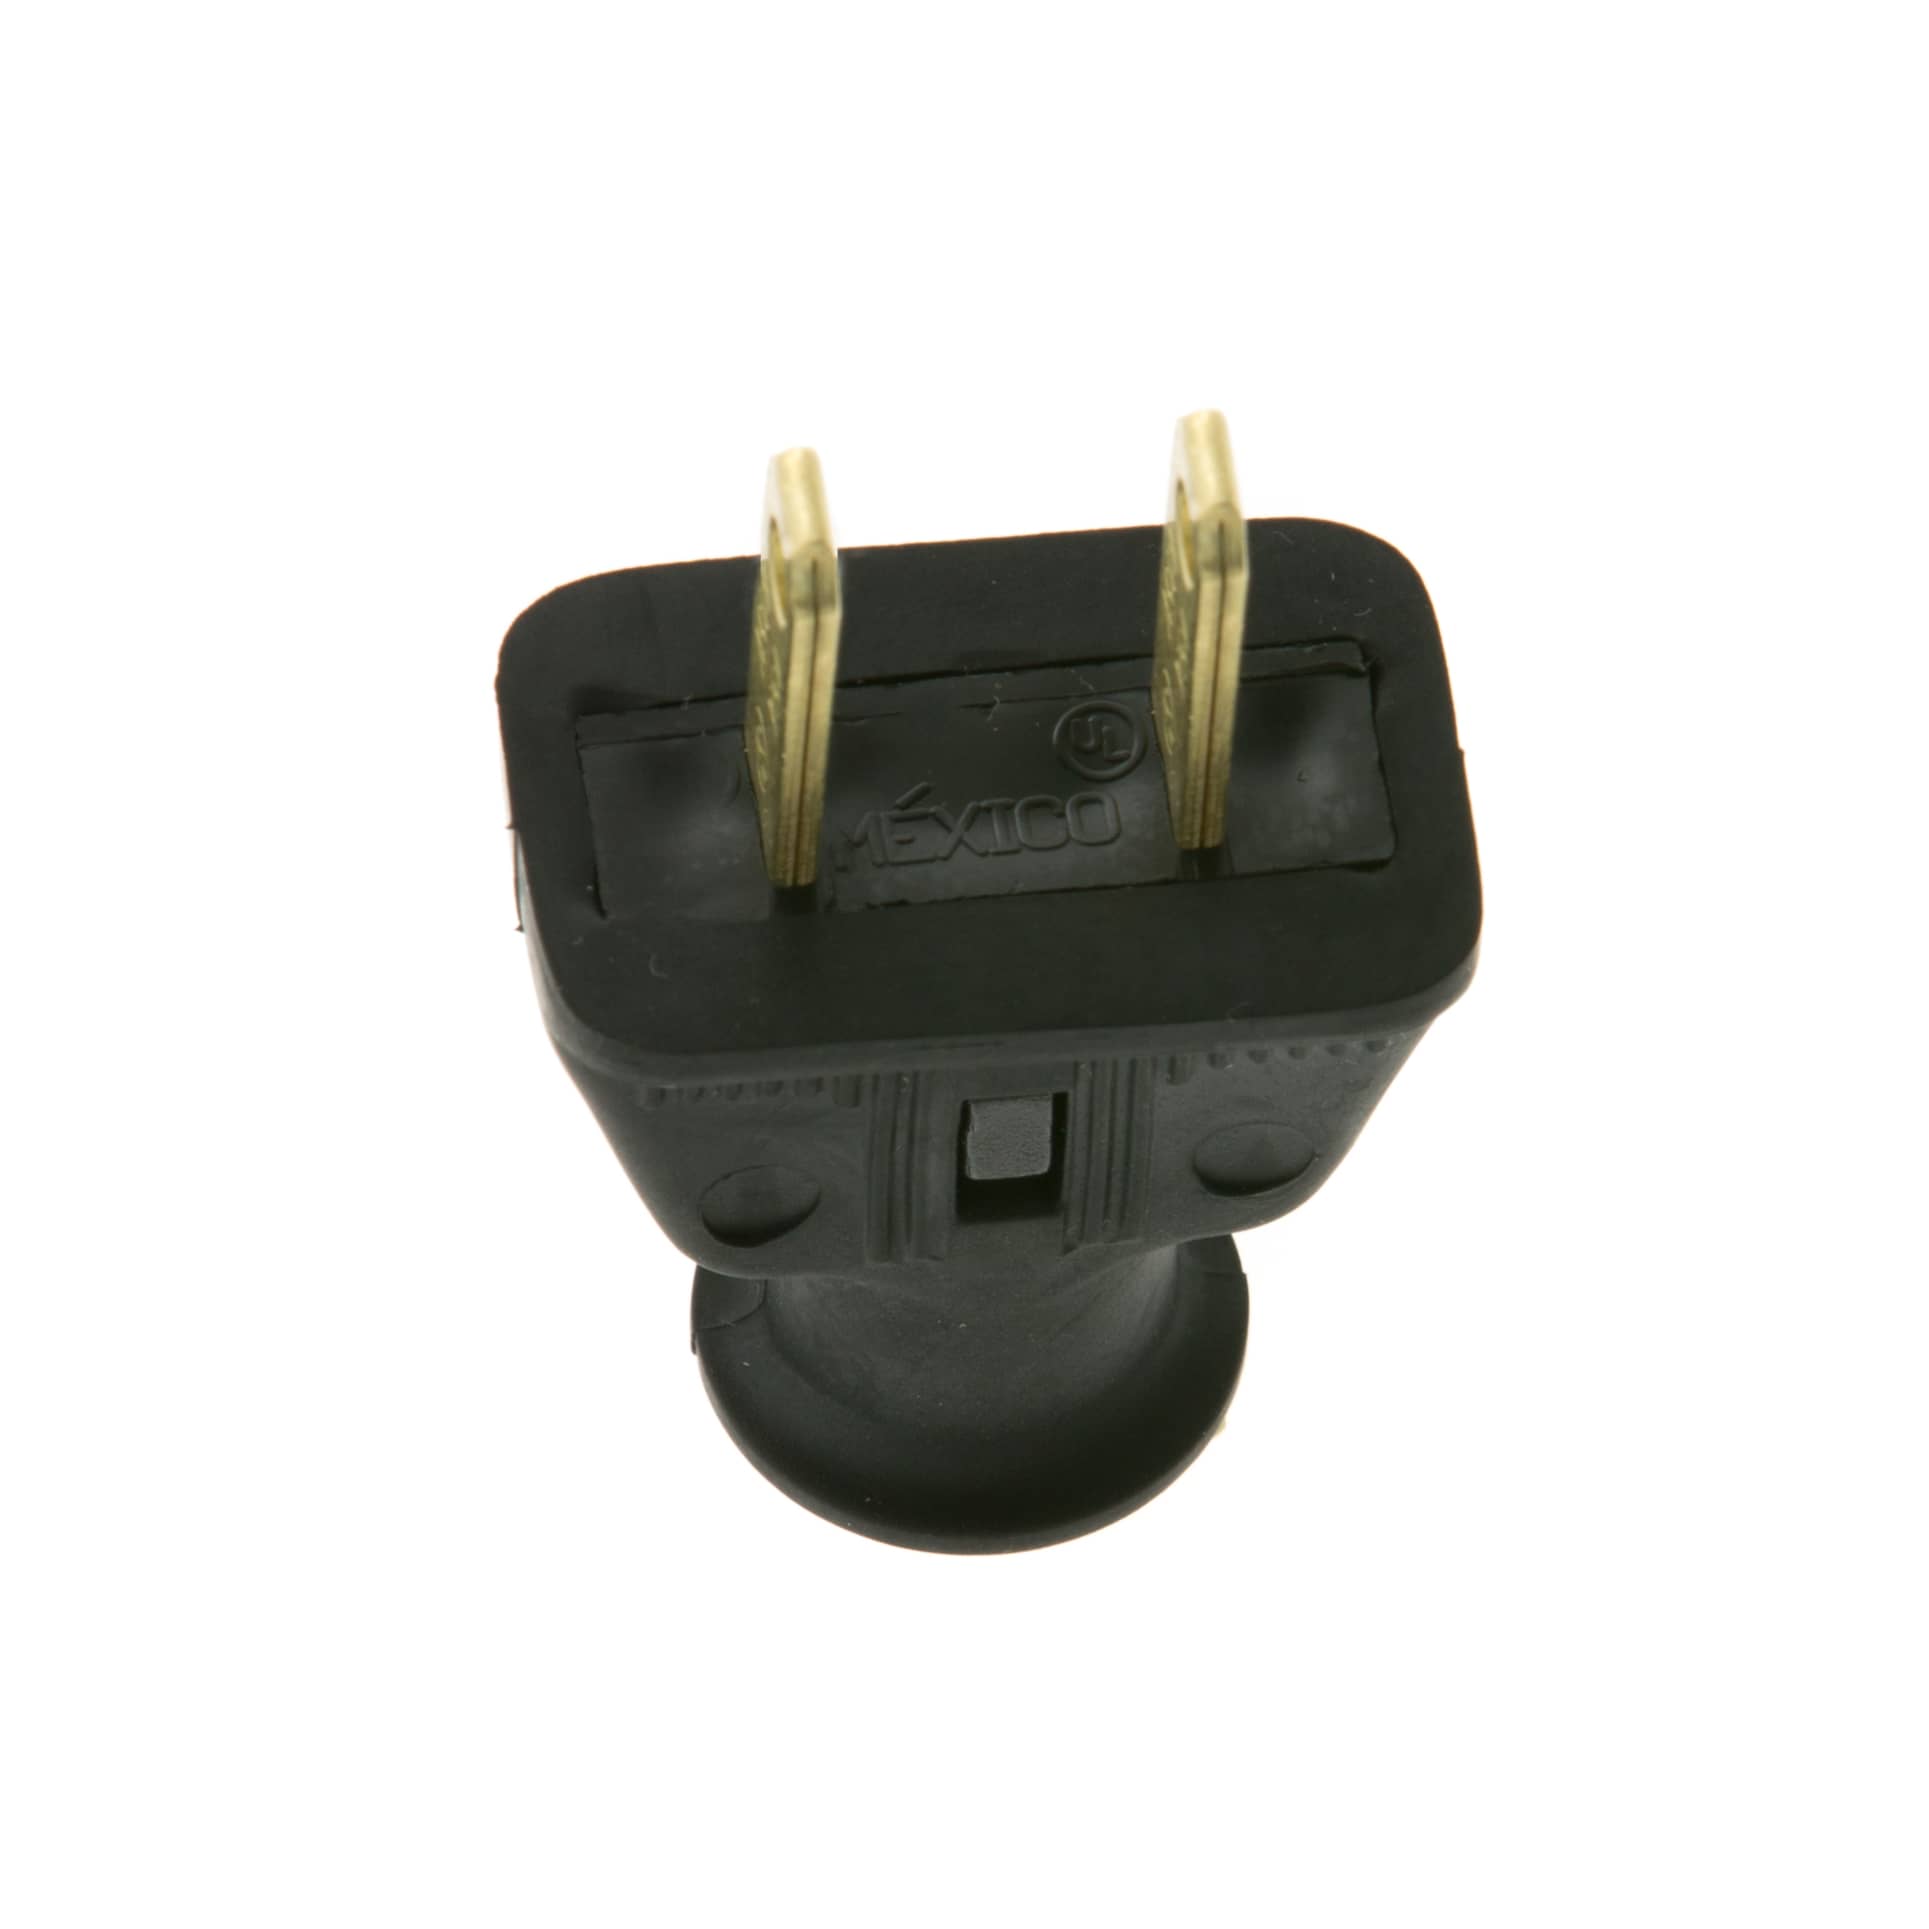 2 Prong Electrical Plug - Black rubber shell, polarized male plug connector